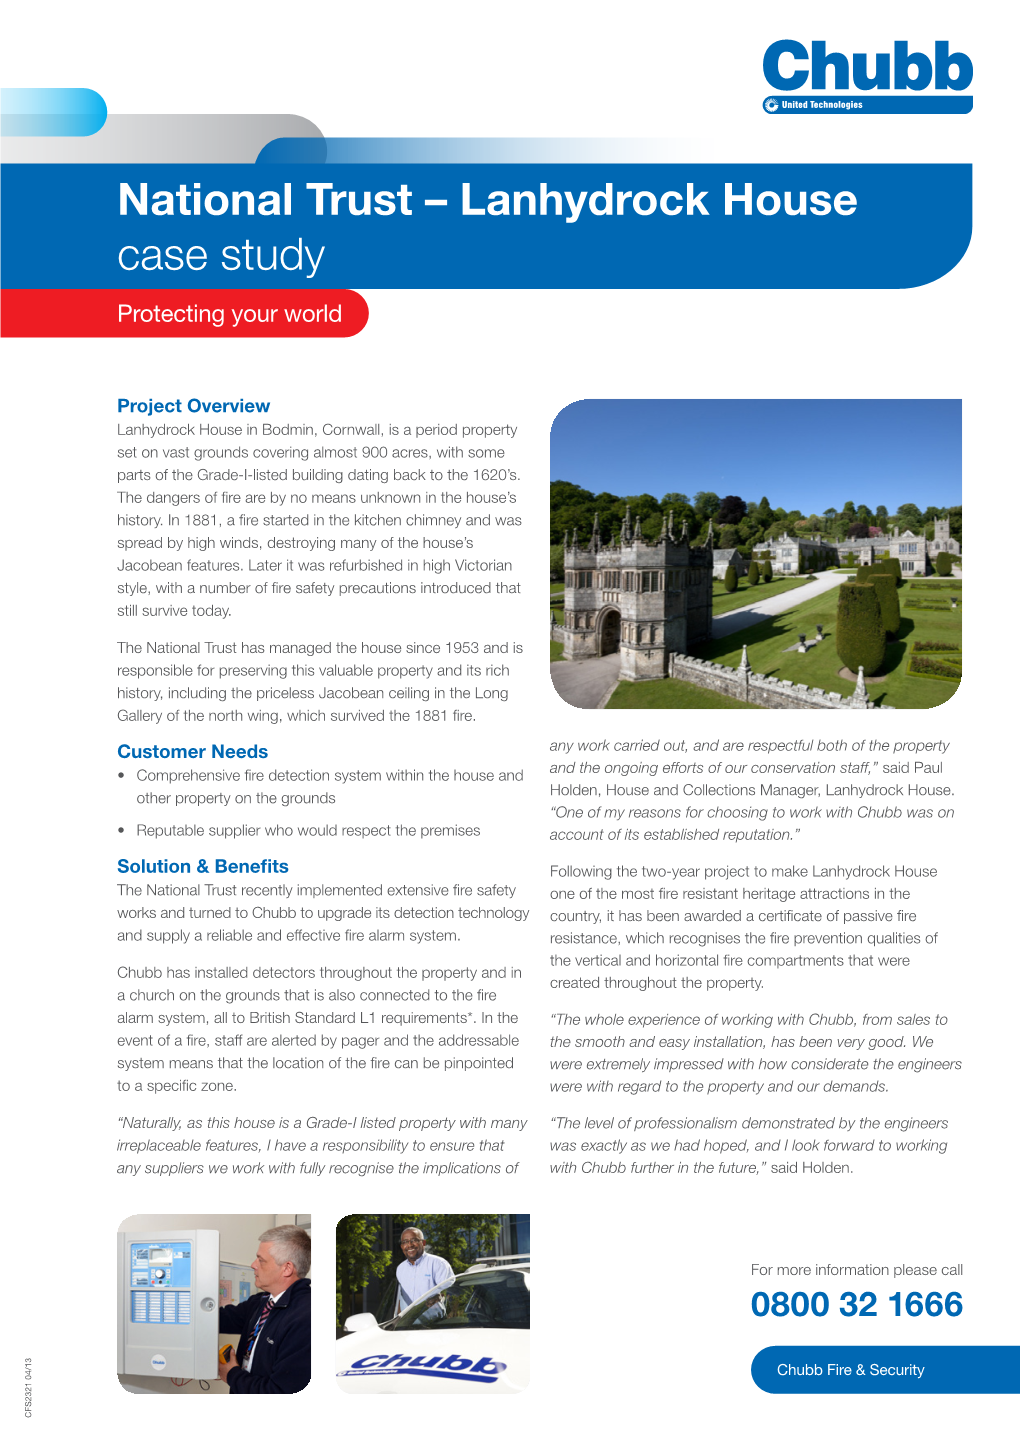 National Trust – Lanhydrock House Case Study Protecting Your World